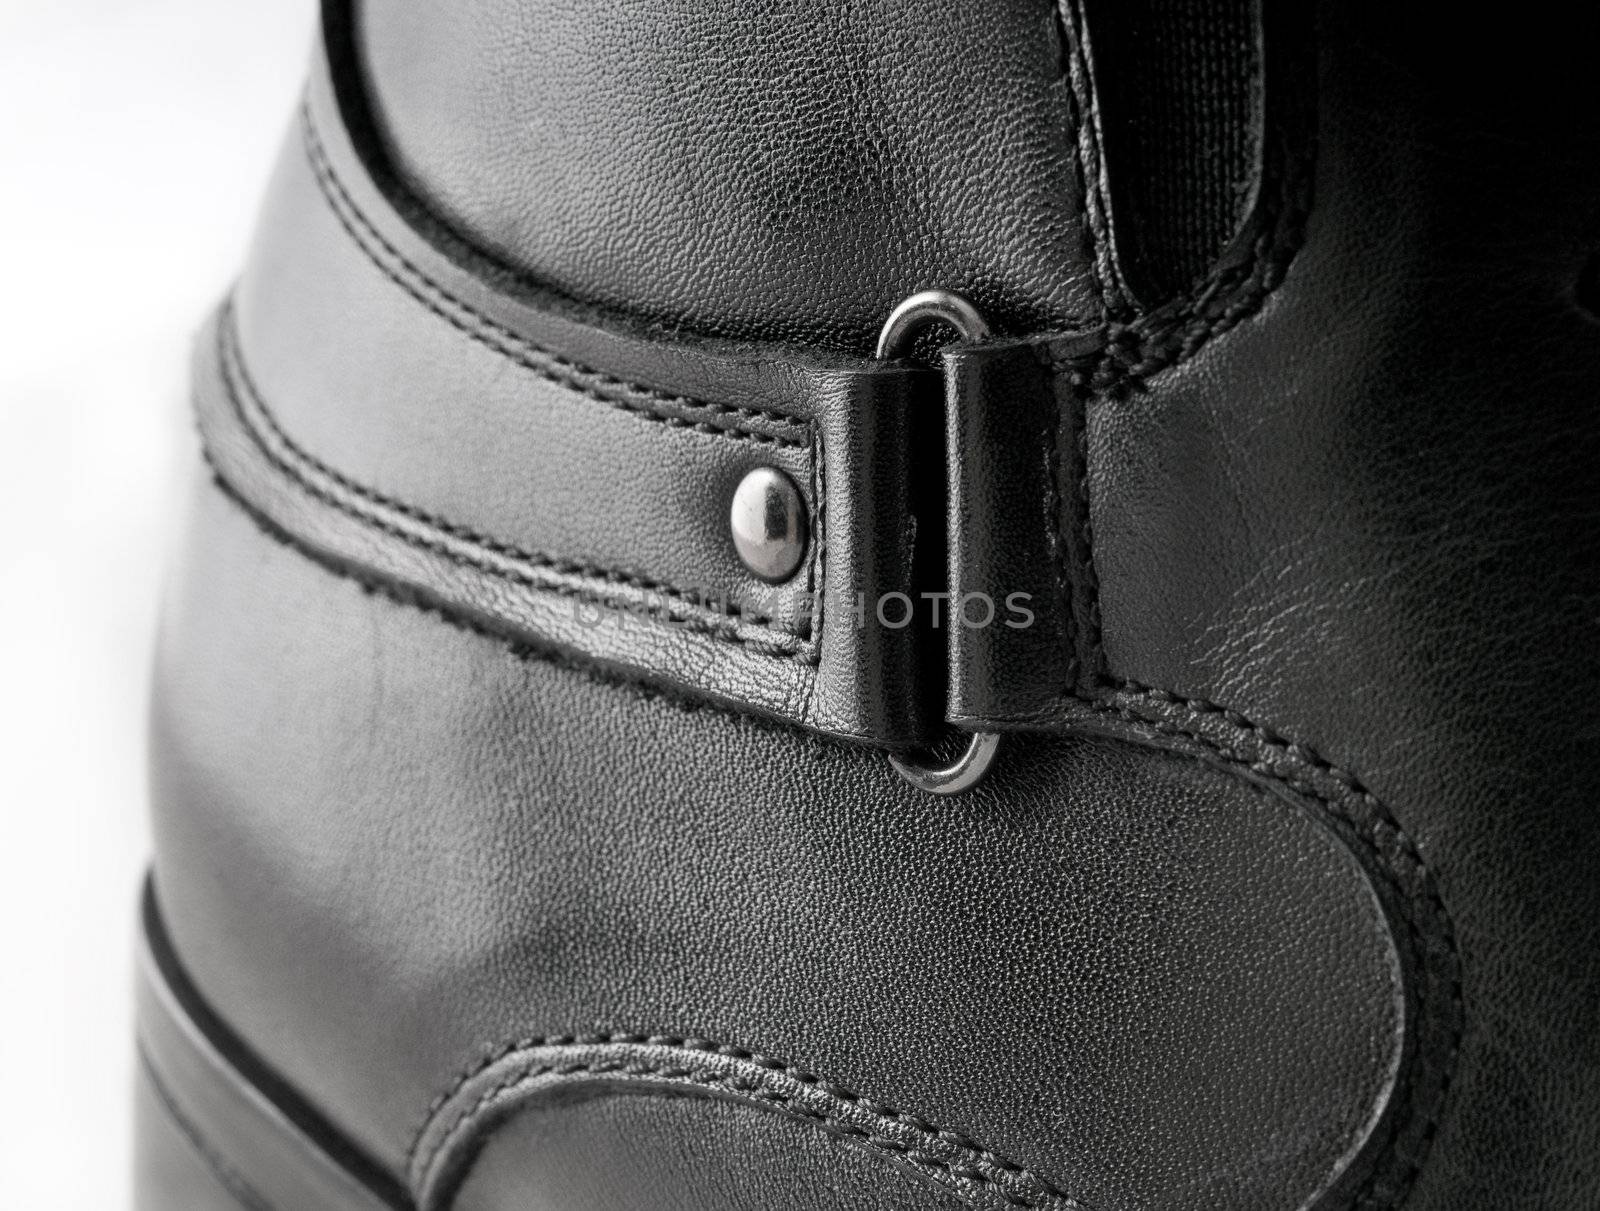 Black Men's leather shoes on a white background